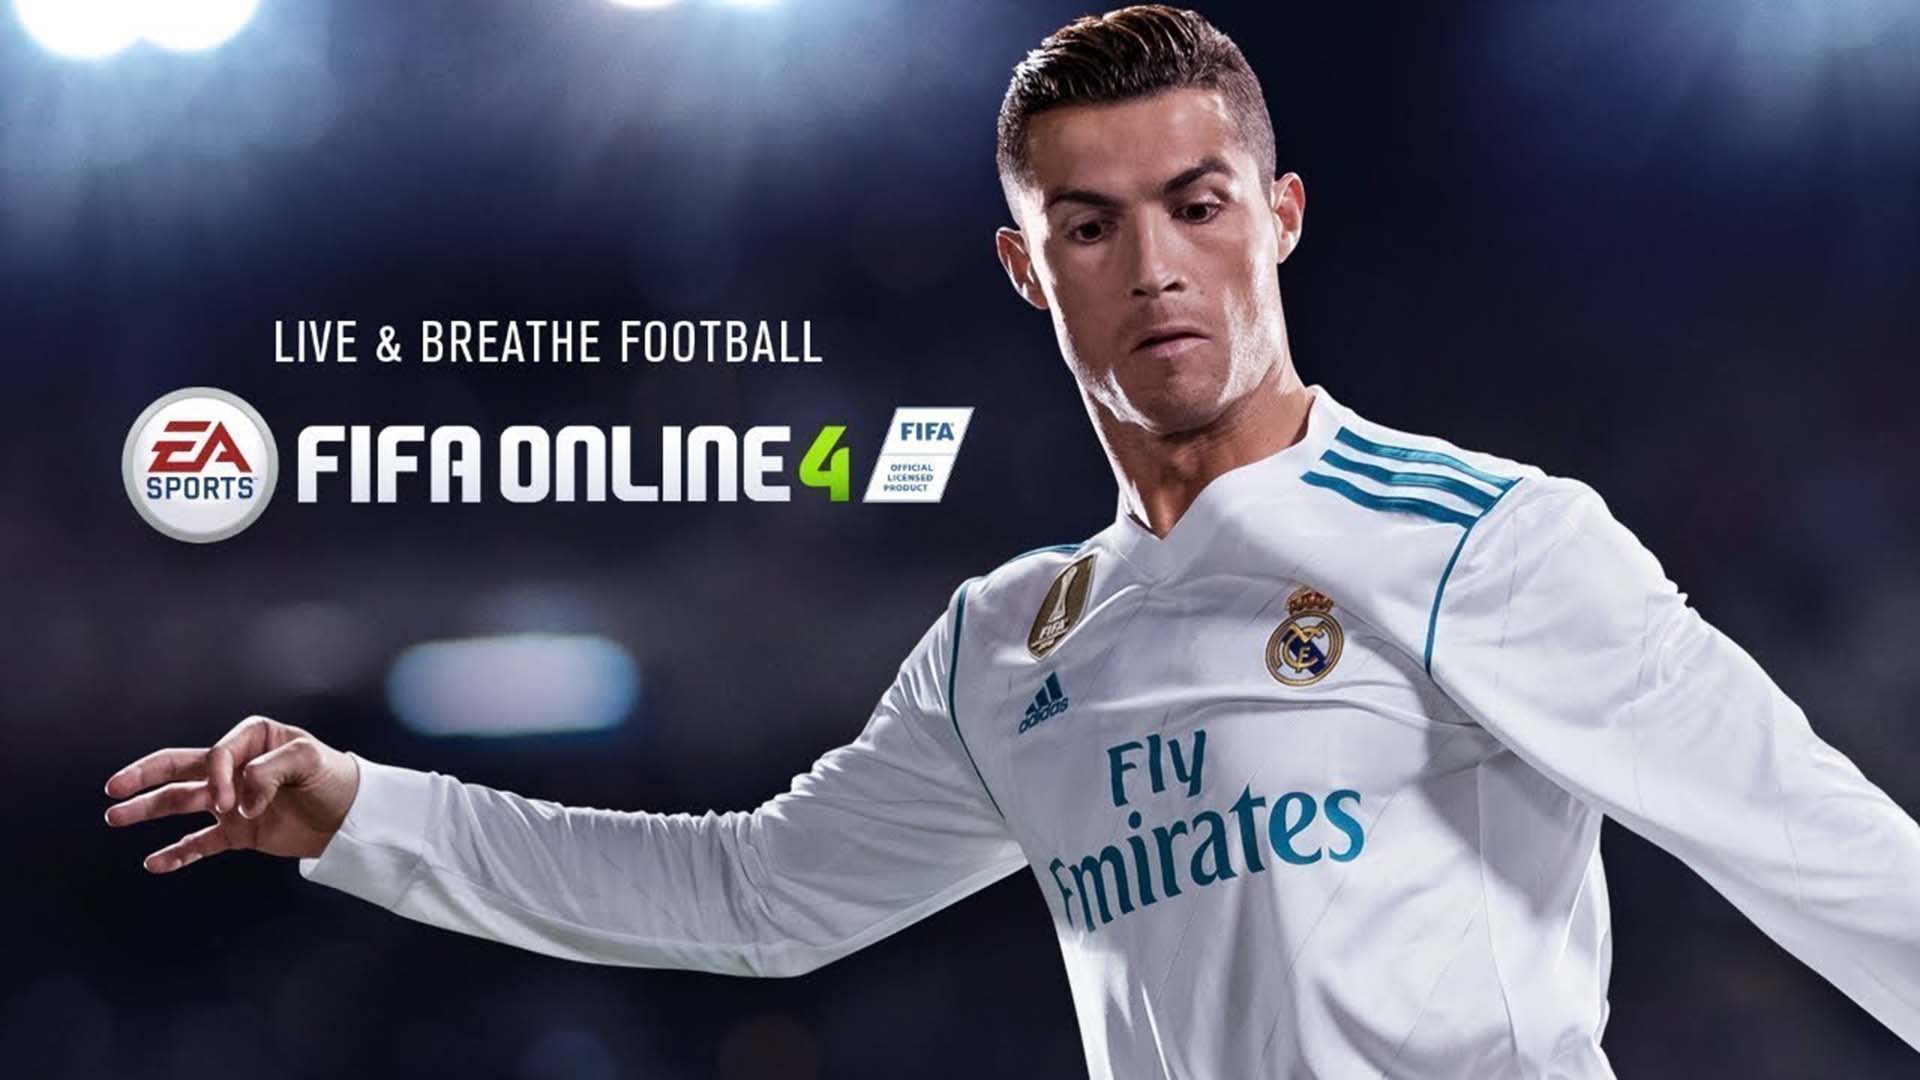 play fifa online download